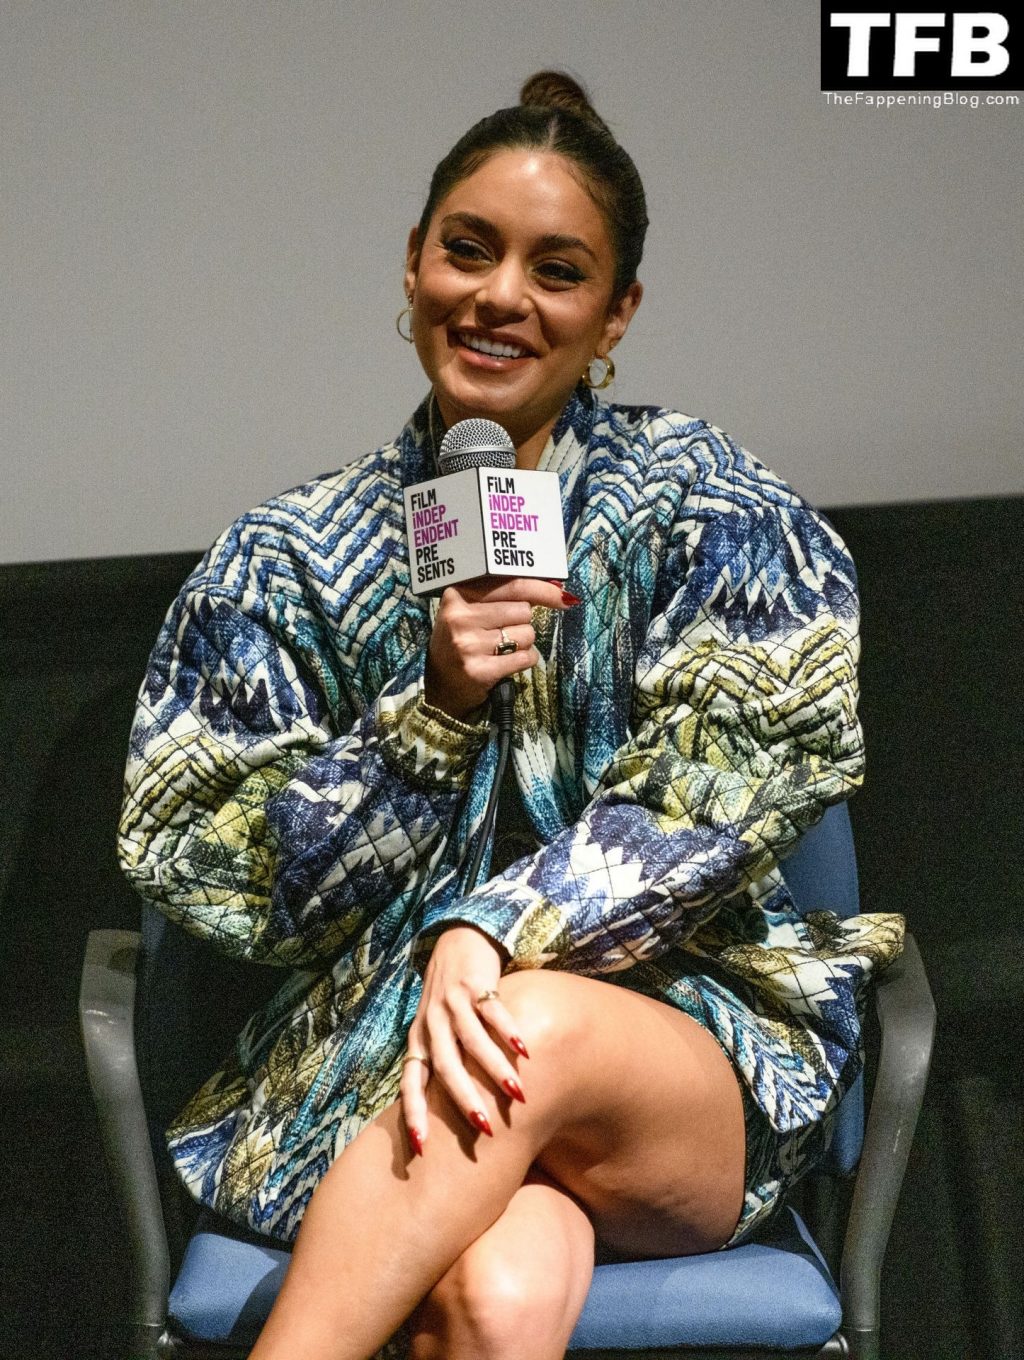 Vanessa Hudgens Flashes Her Sexy Legs at the Film Independent Screening of “Tick, Tick… Boom!” at The Landmark in LA (24 Photos)